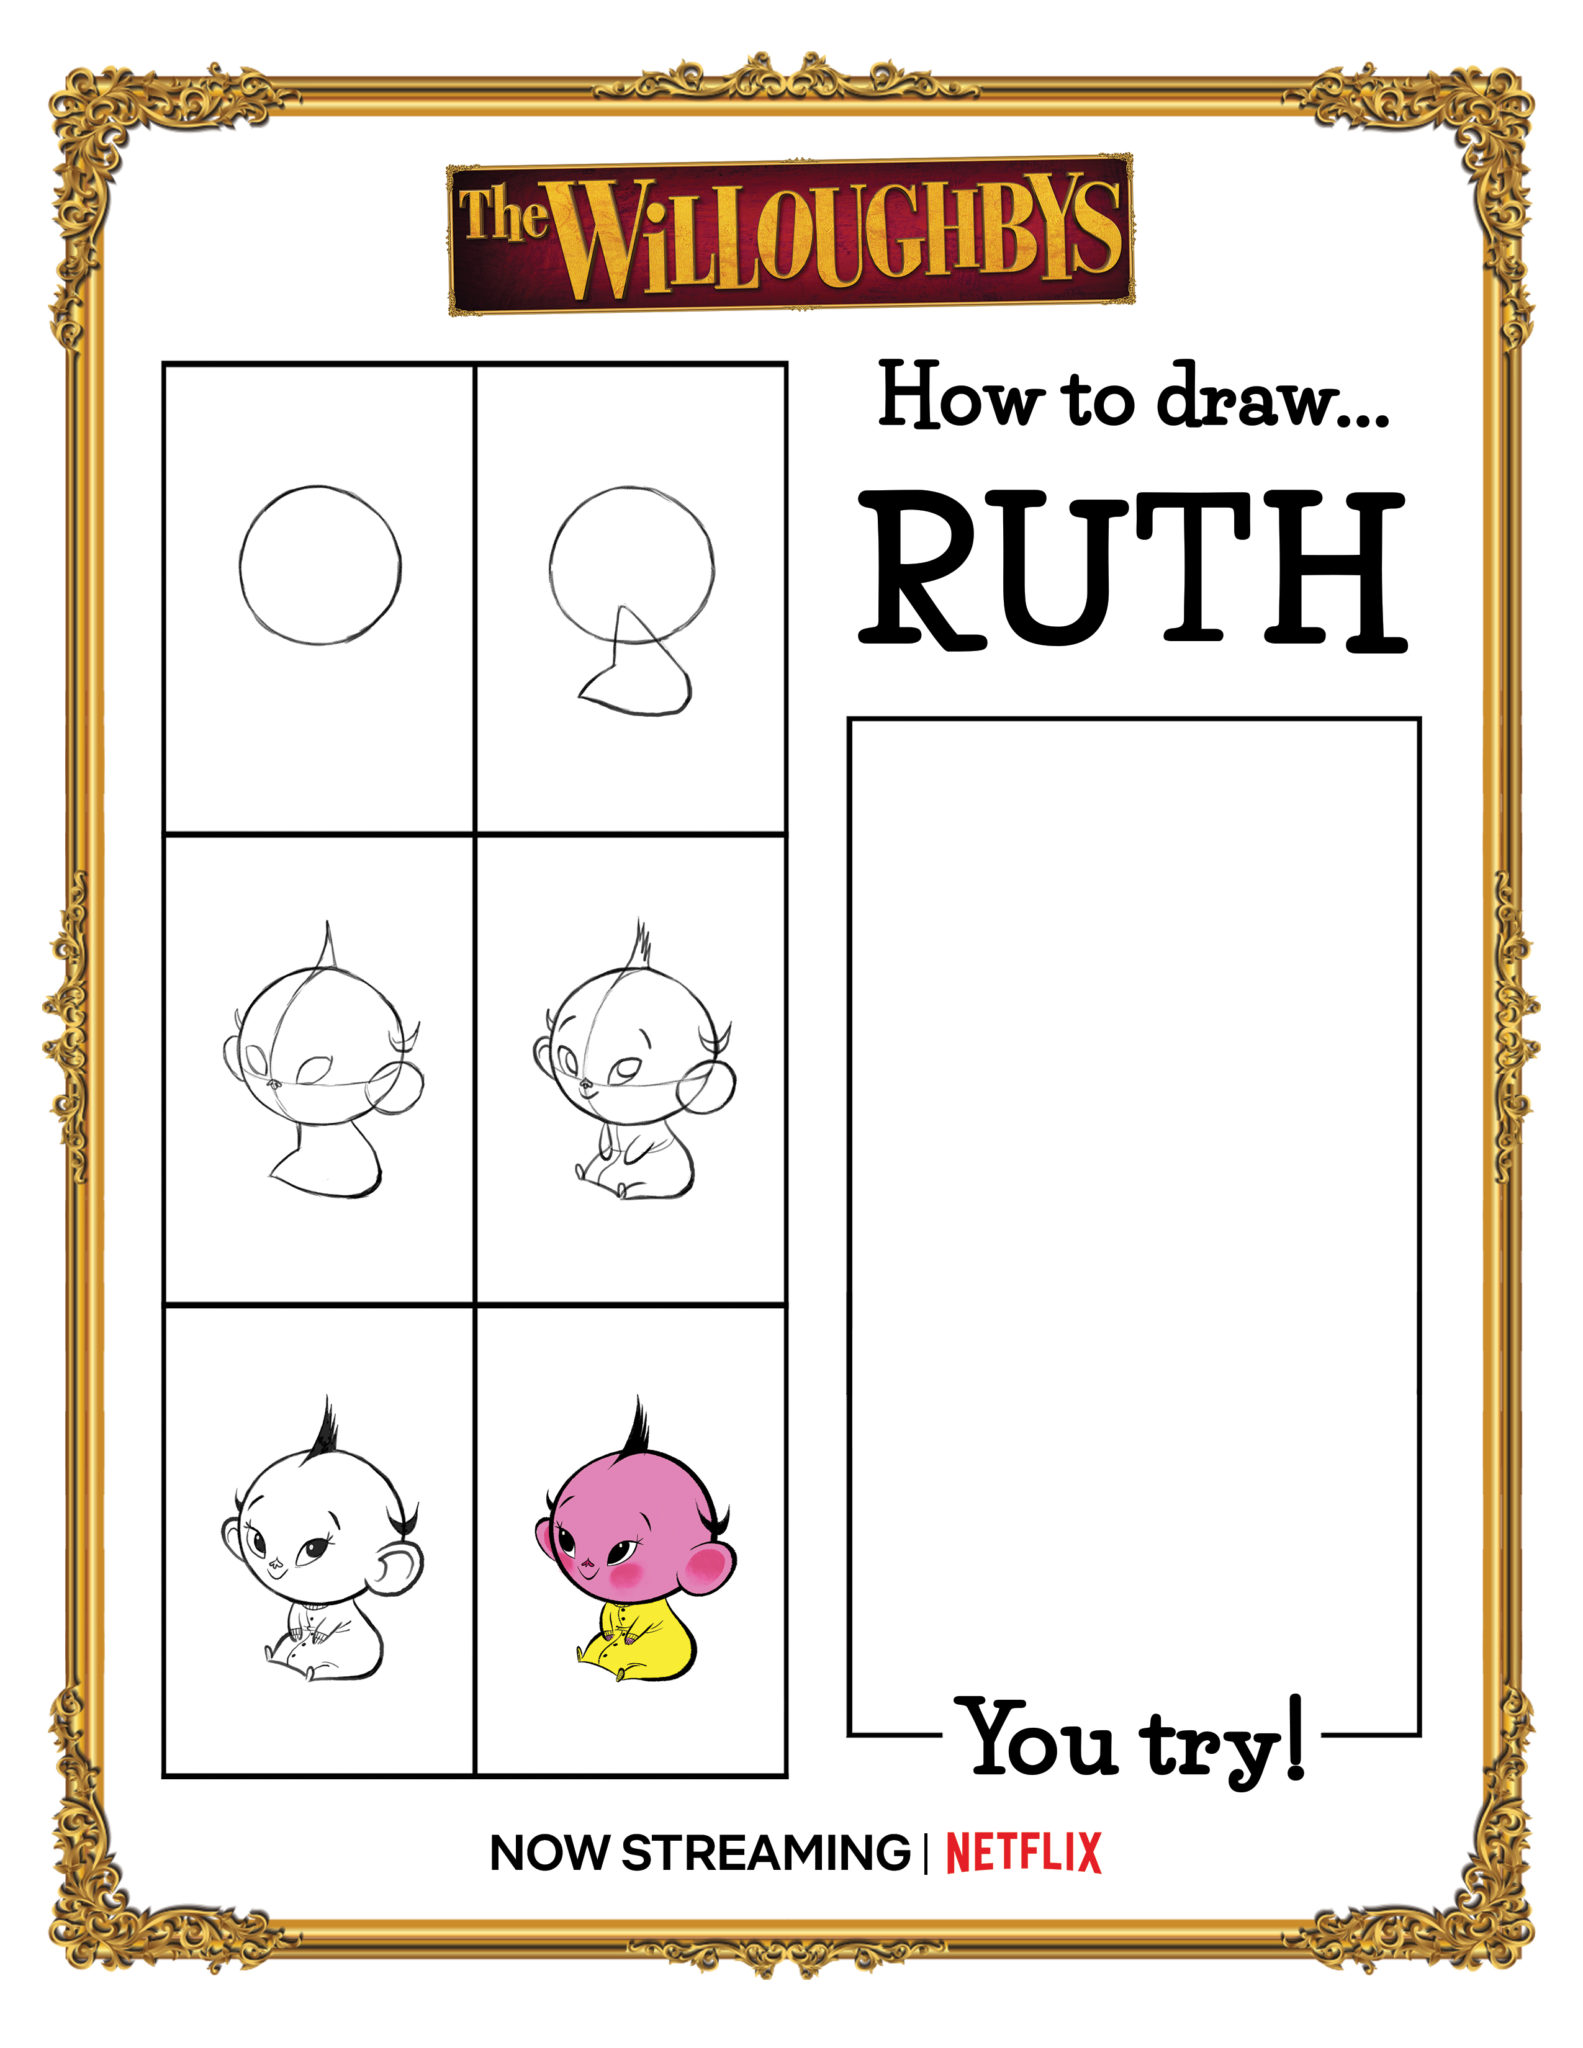 Learn How to Draw THE WILLOUGHBYS